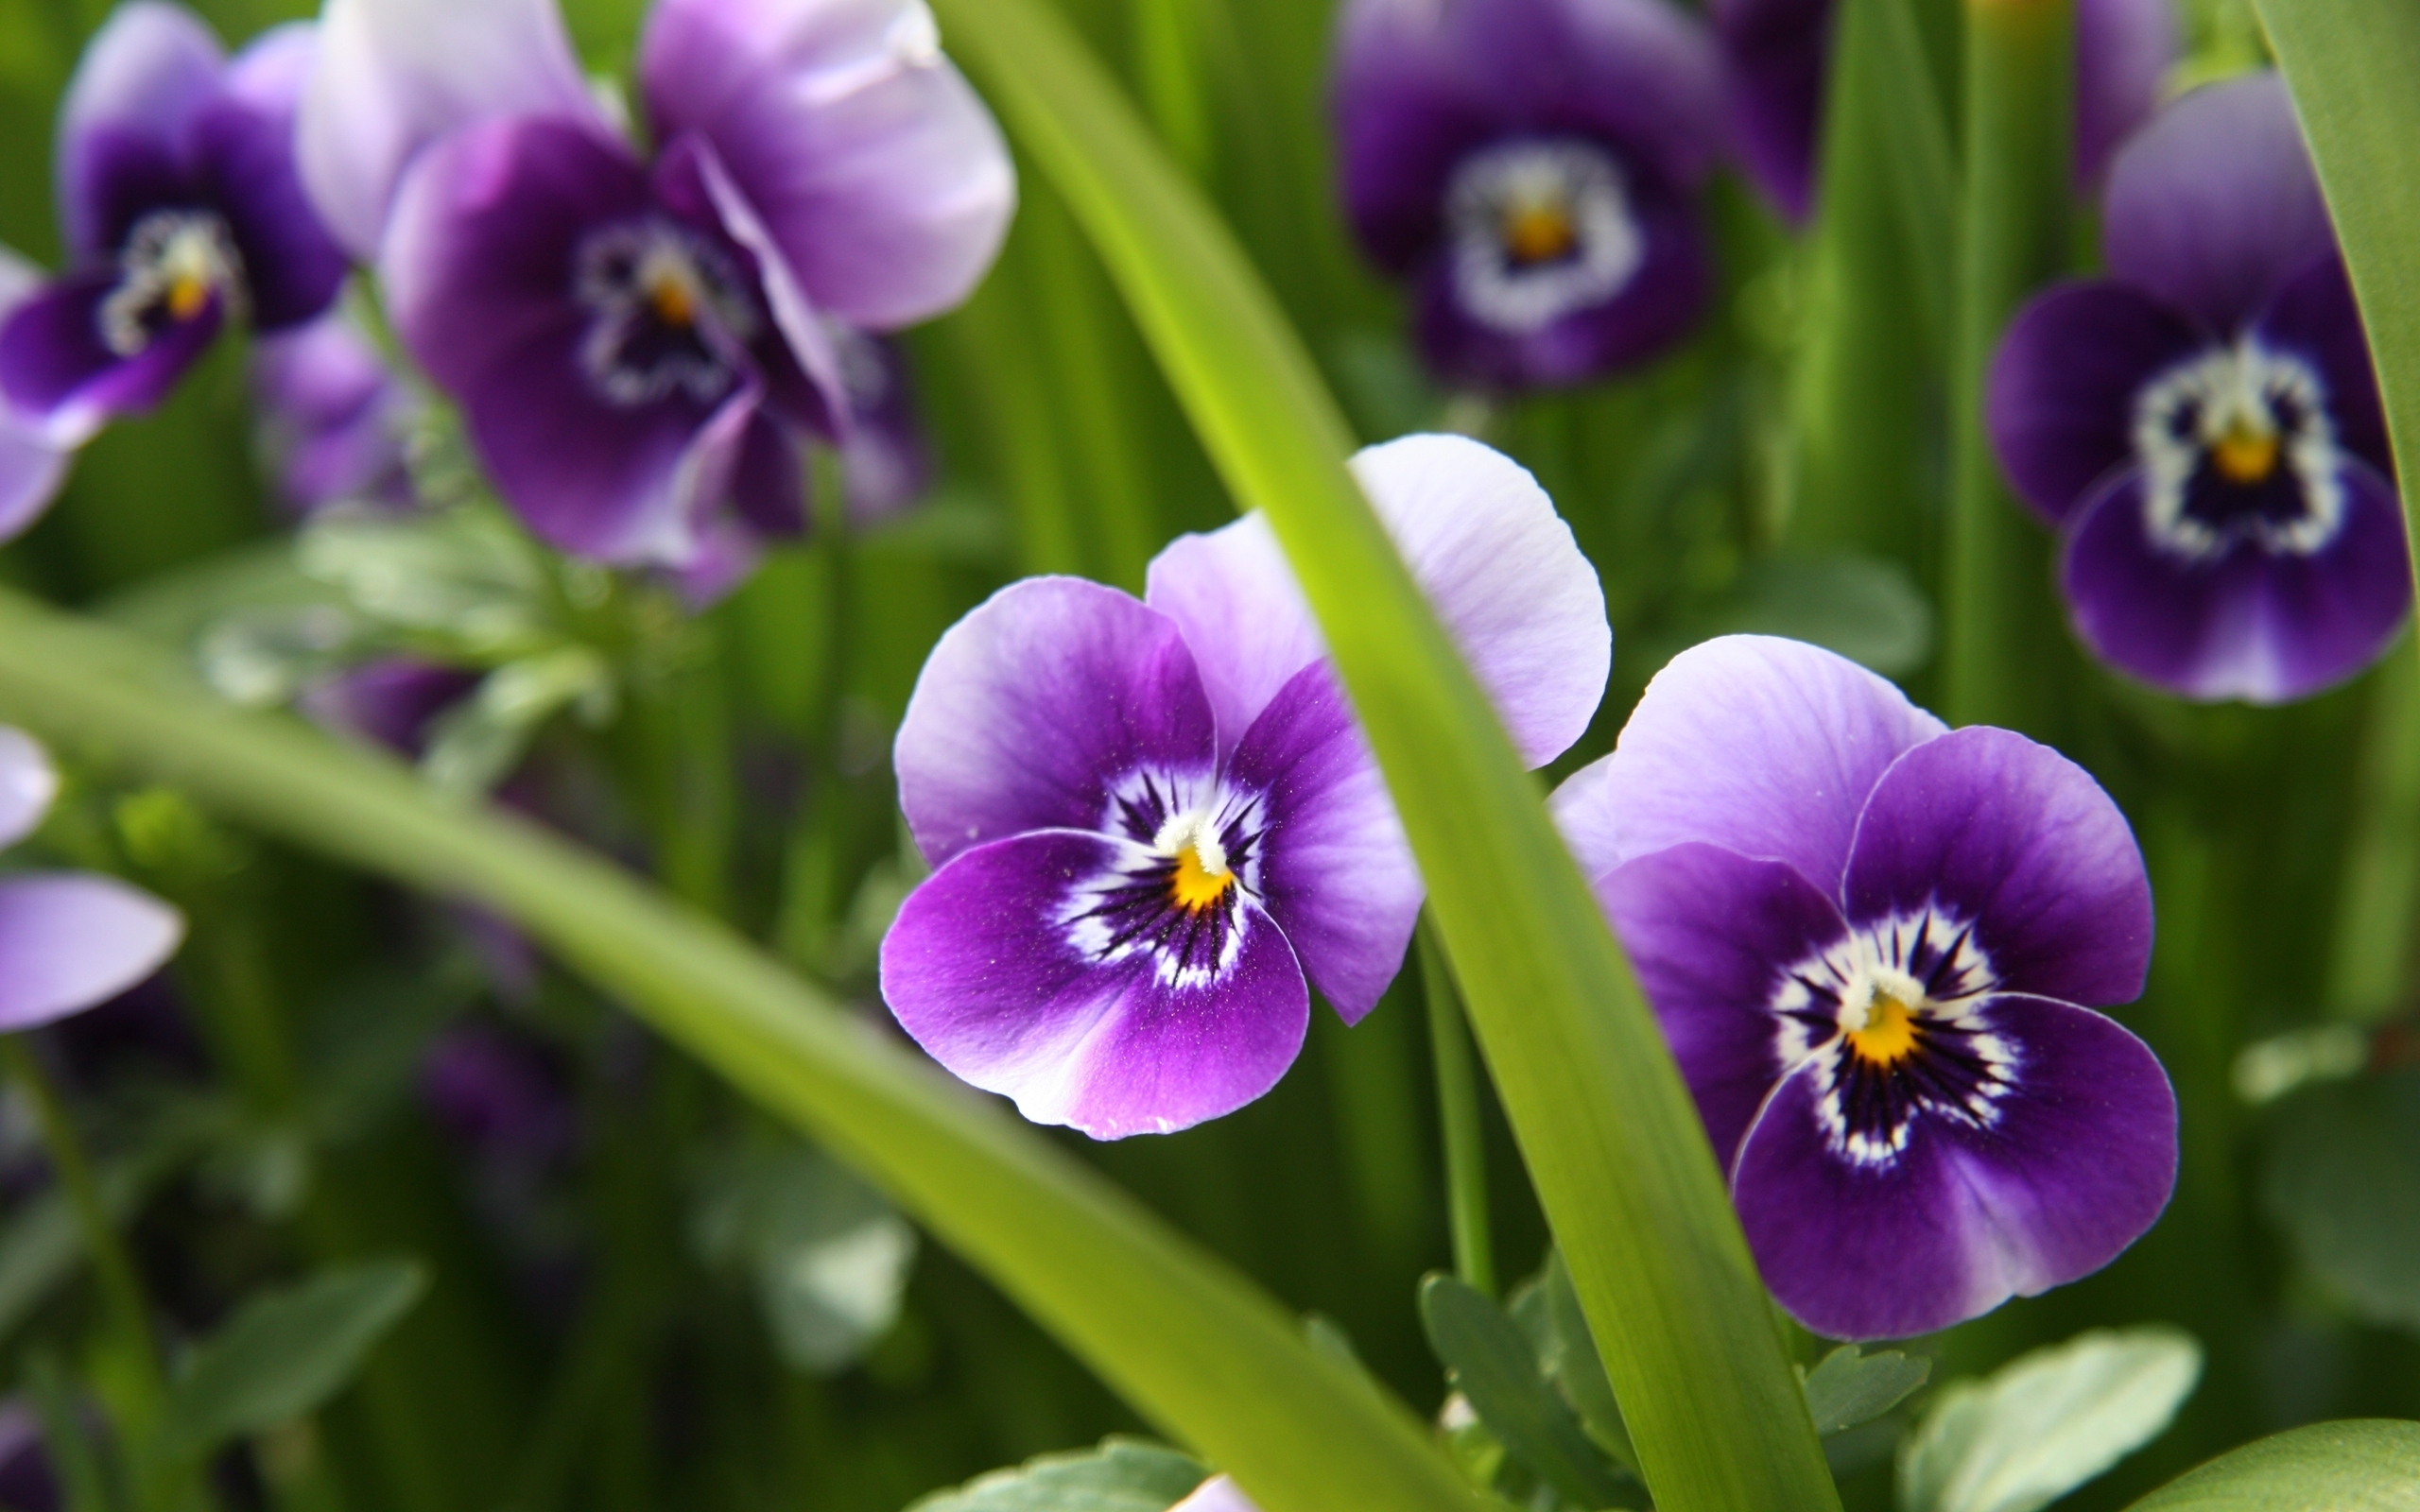 Viola tricolor wallpapers and images - wallpapers, pictures, photos